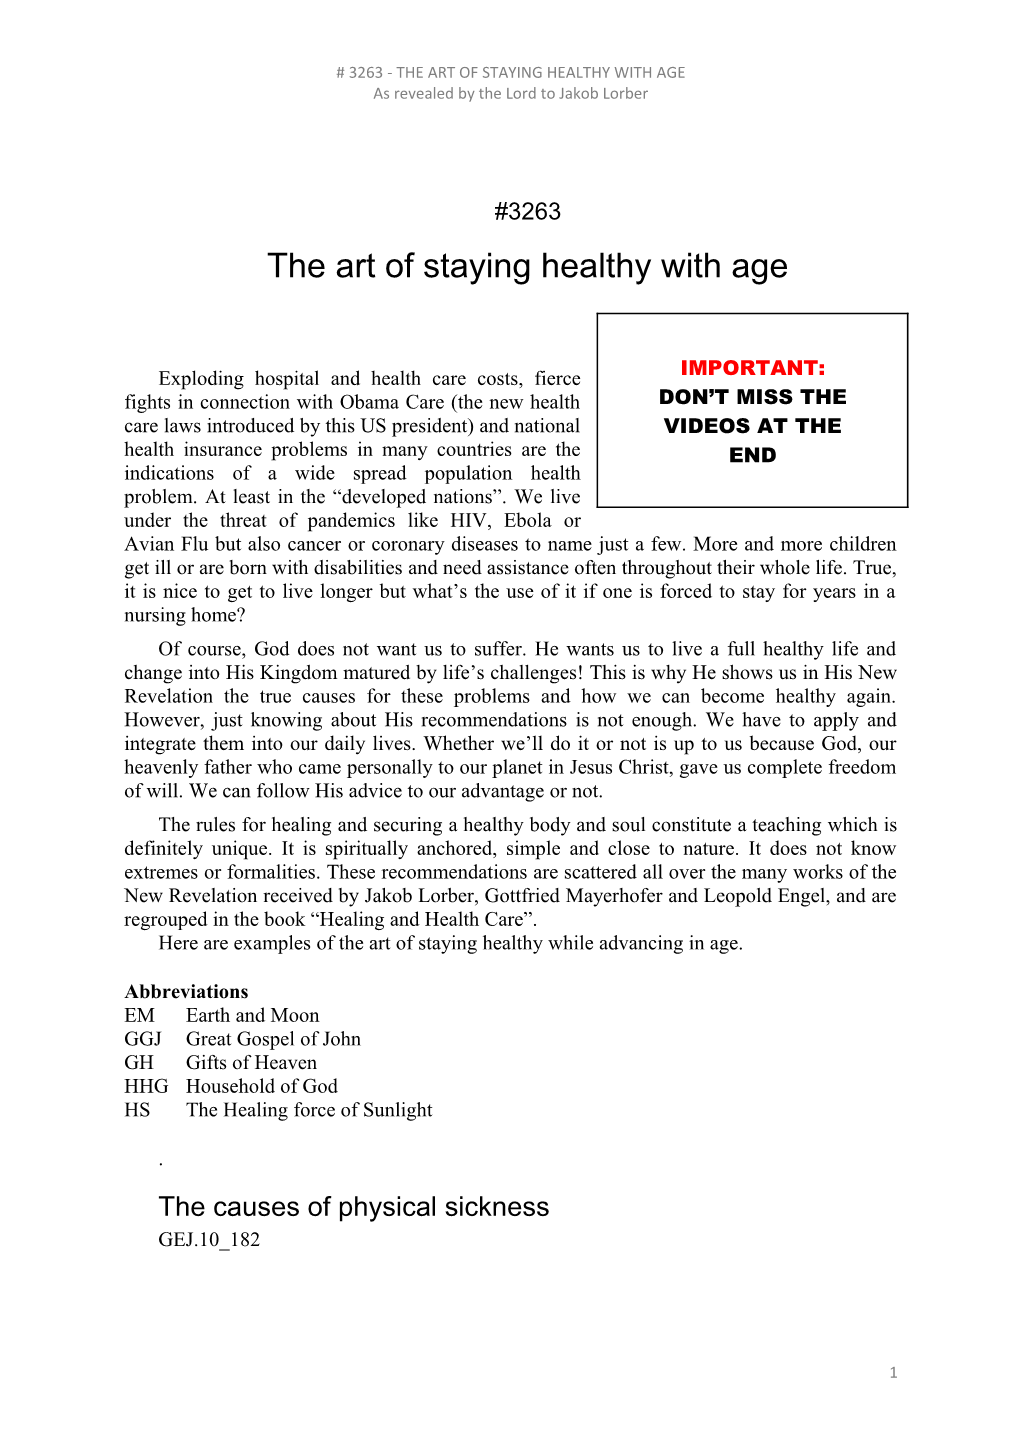 The Art of Staying Healthy with Age